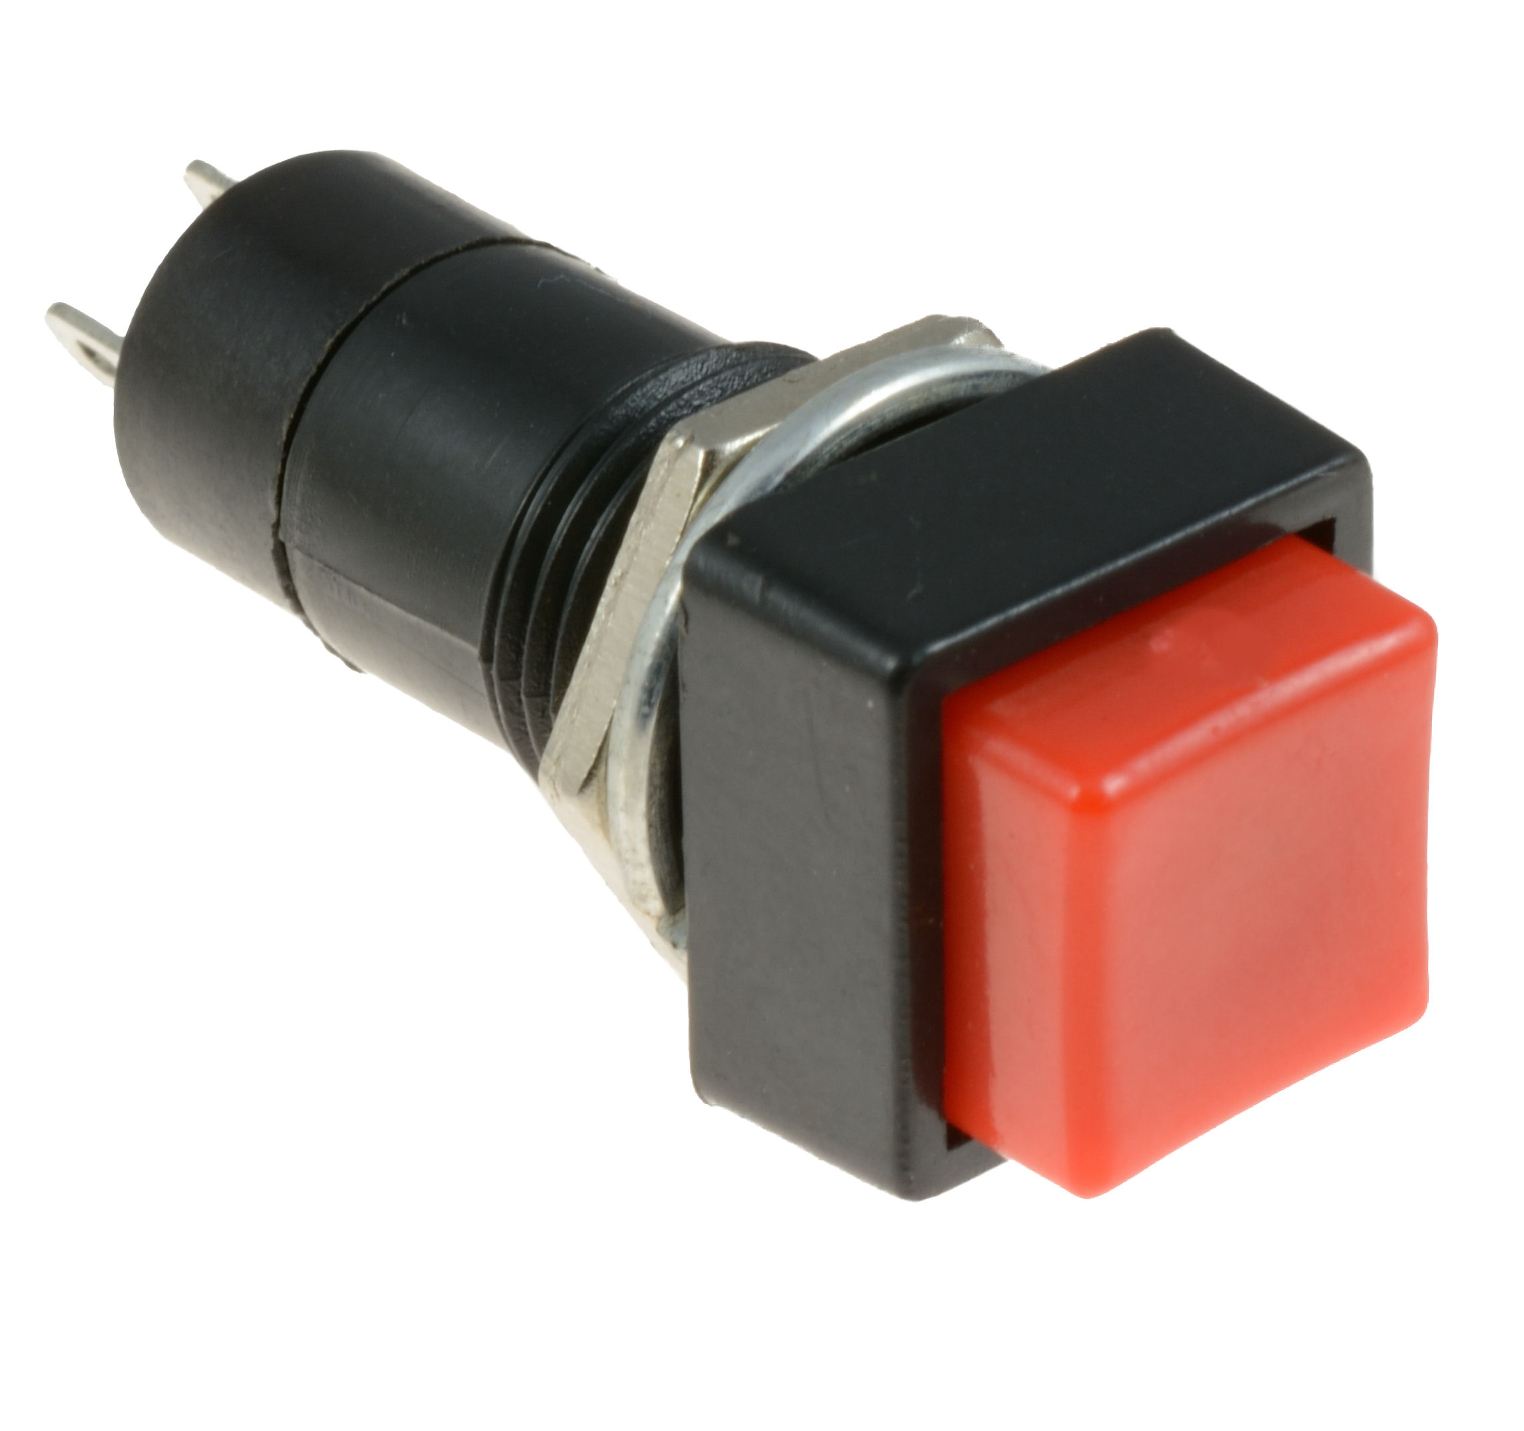 Square Latching On/Off Push Button Switch Red or Black SPST Car Dash ...